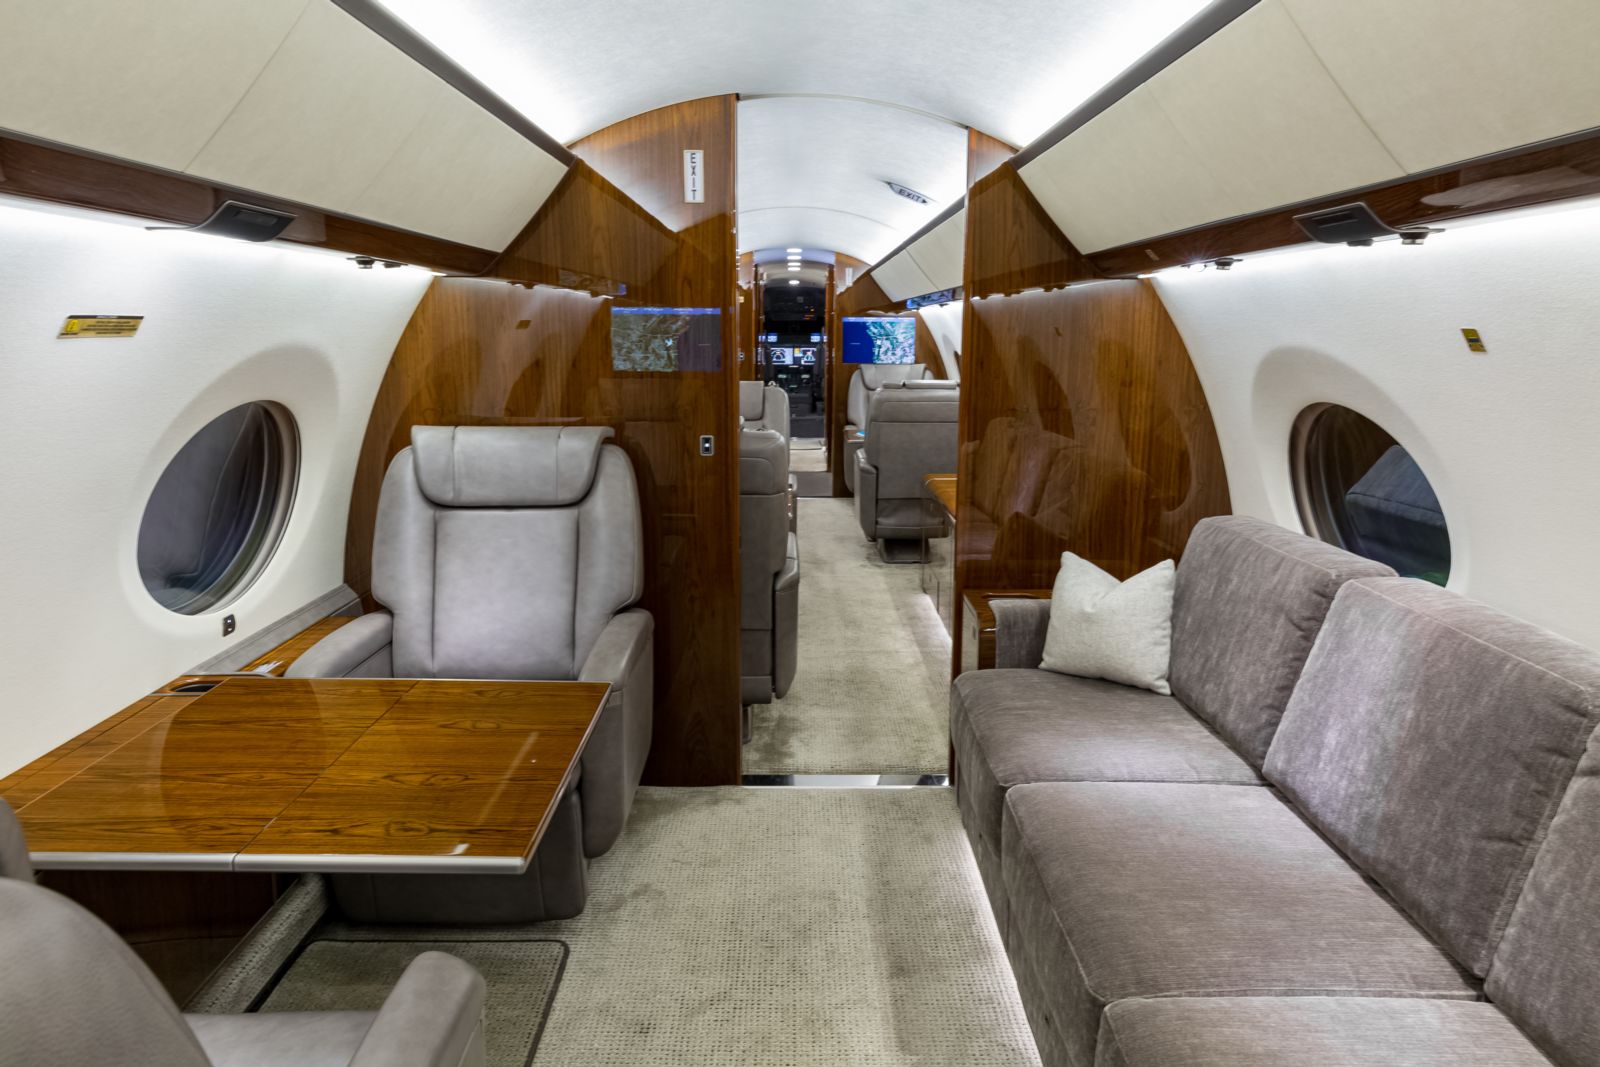 Gulfstream G650  S/N 6003 for sale | gallery image: /userfiles/images/G650_sn6003/bfp_2699.jpg